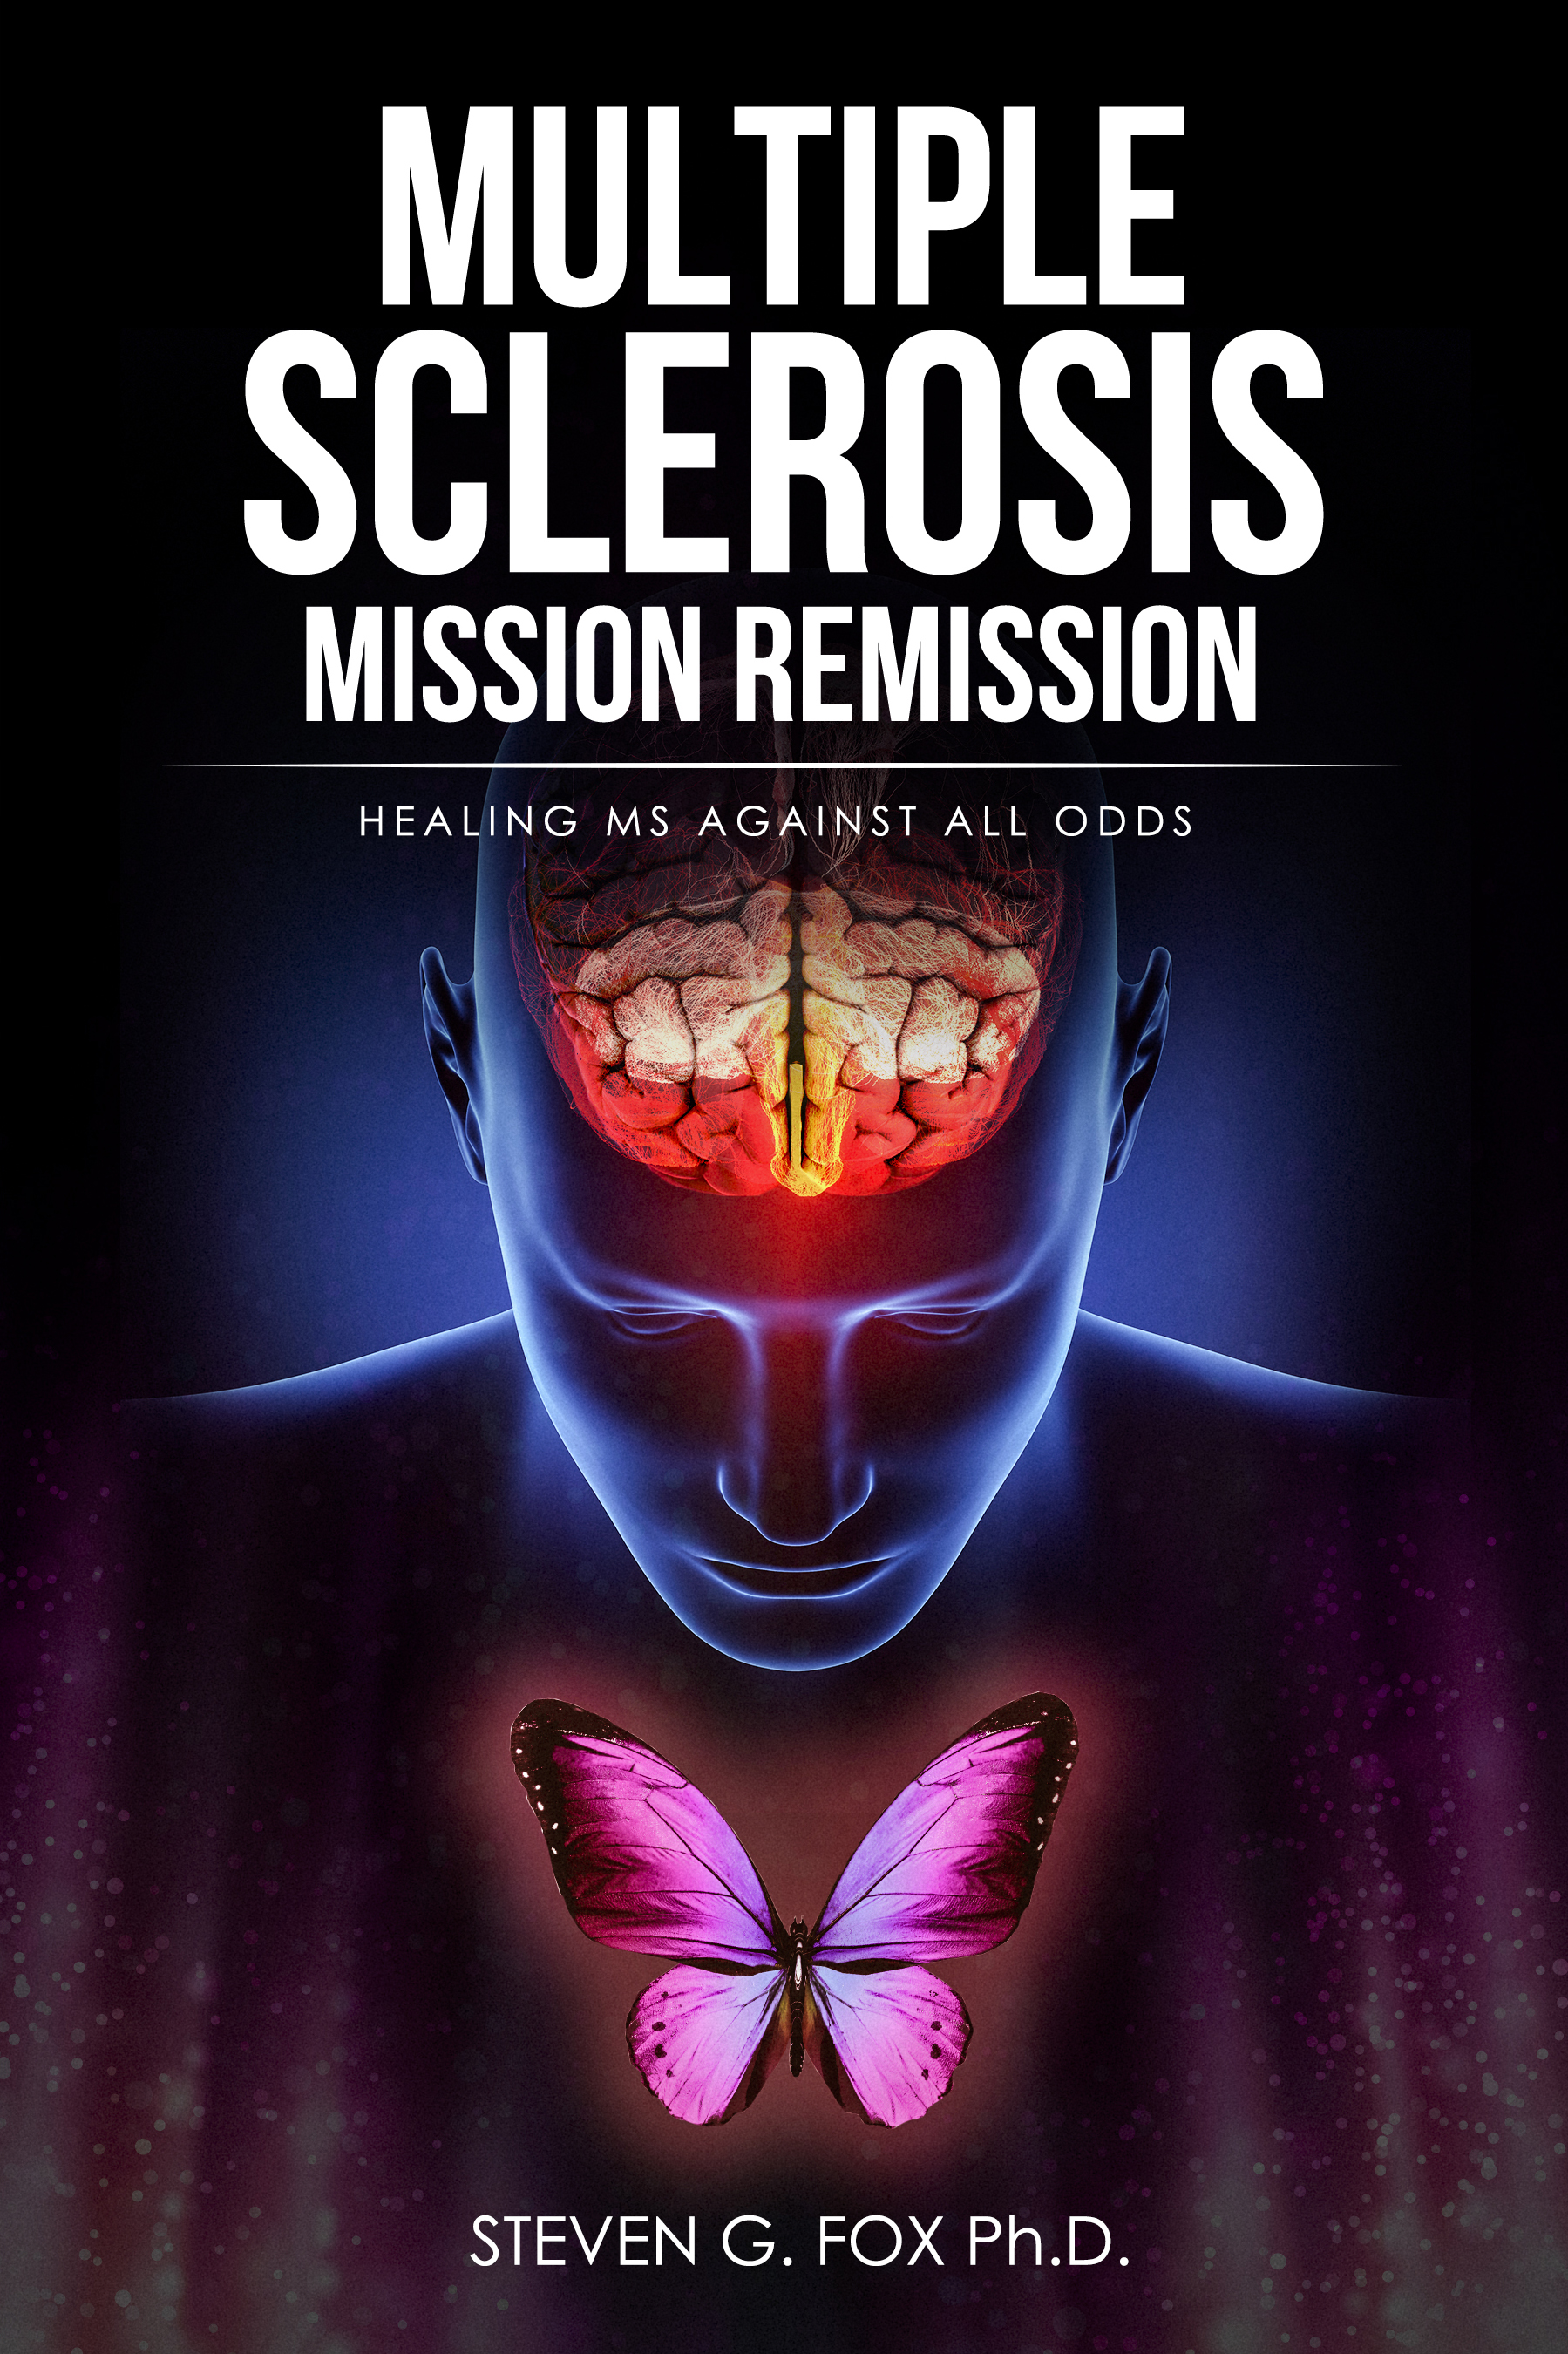 FREE: Multiple Sclerosis Mission Remission: Healing MS Against All Odds by Steven G. Fox Ph.D.